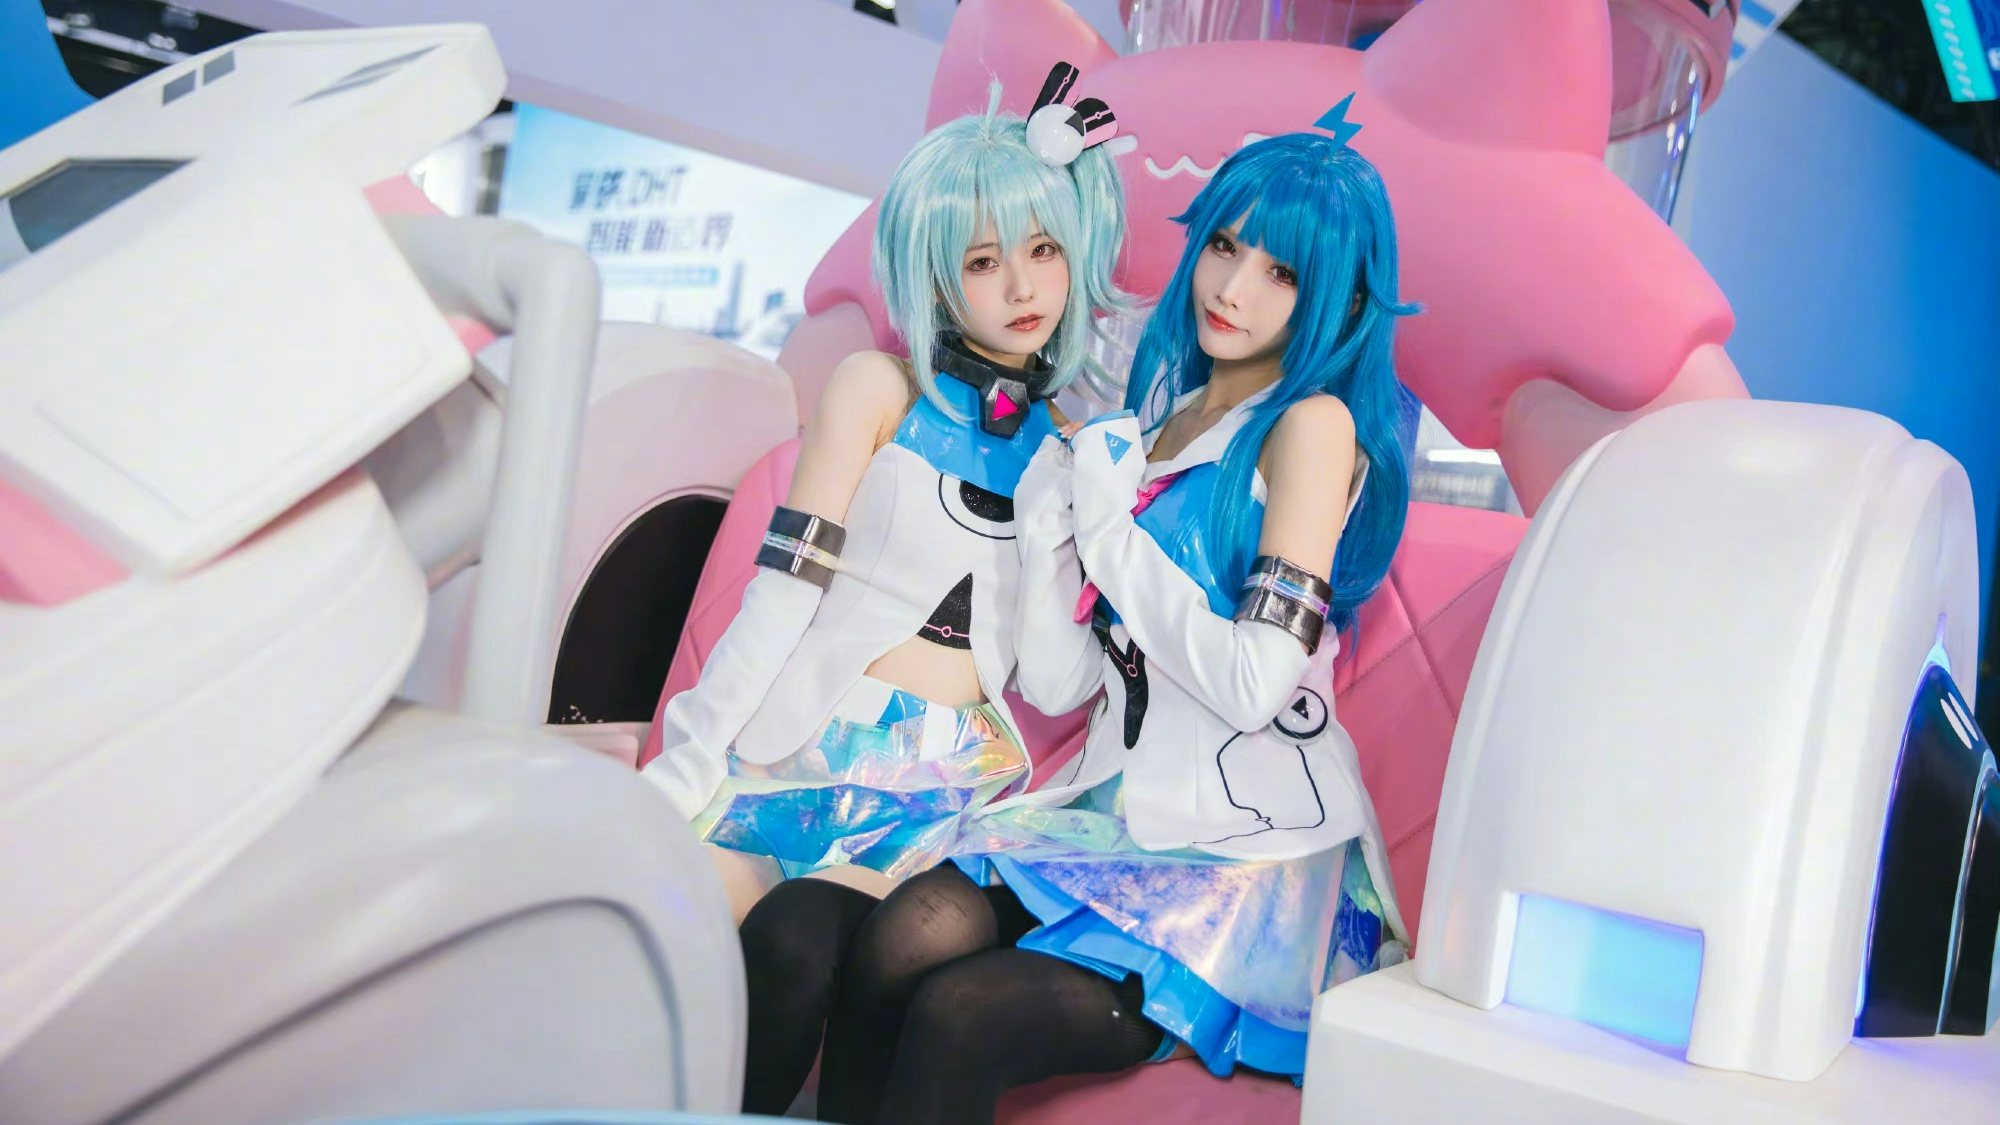 Video sharing platform Bilibili just launched a new livestreaming function in a bid to revamp its loss-making business. But is it too late? Photo: Bilibili